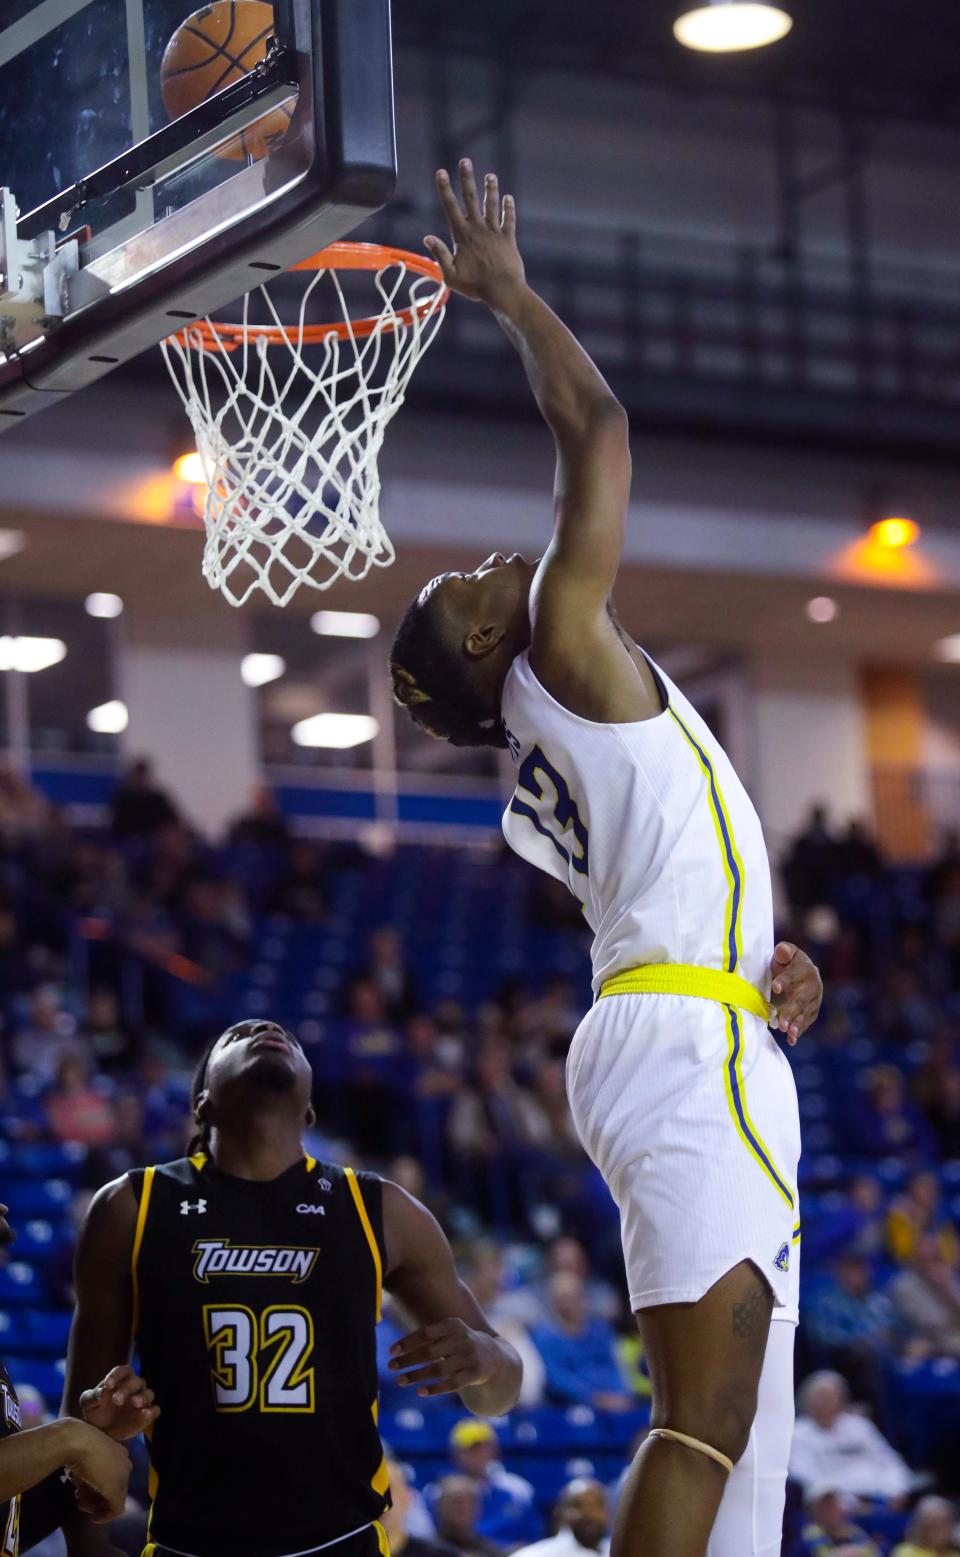 Delaware's Jyare Davis scores on a reverse layup in the second half of the Blue Hens' 72-59 win against Towson at the Bob Carpenter Center, Wednesday, Jan. 11, 2023.